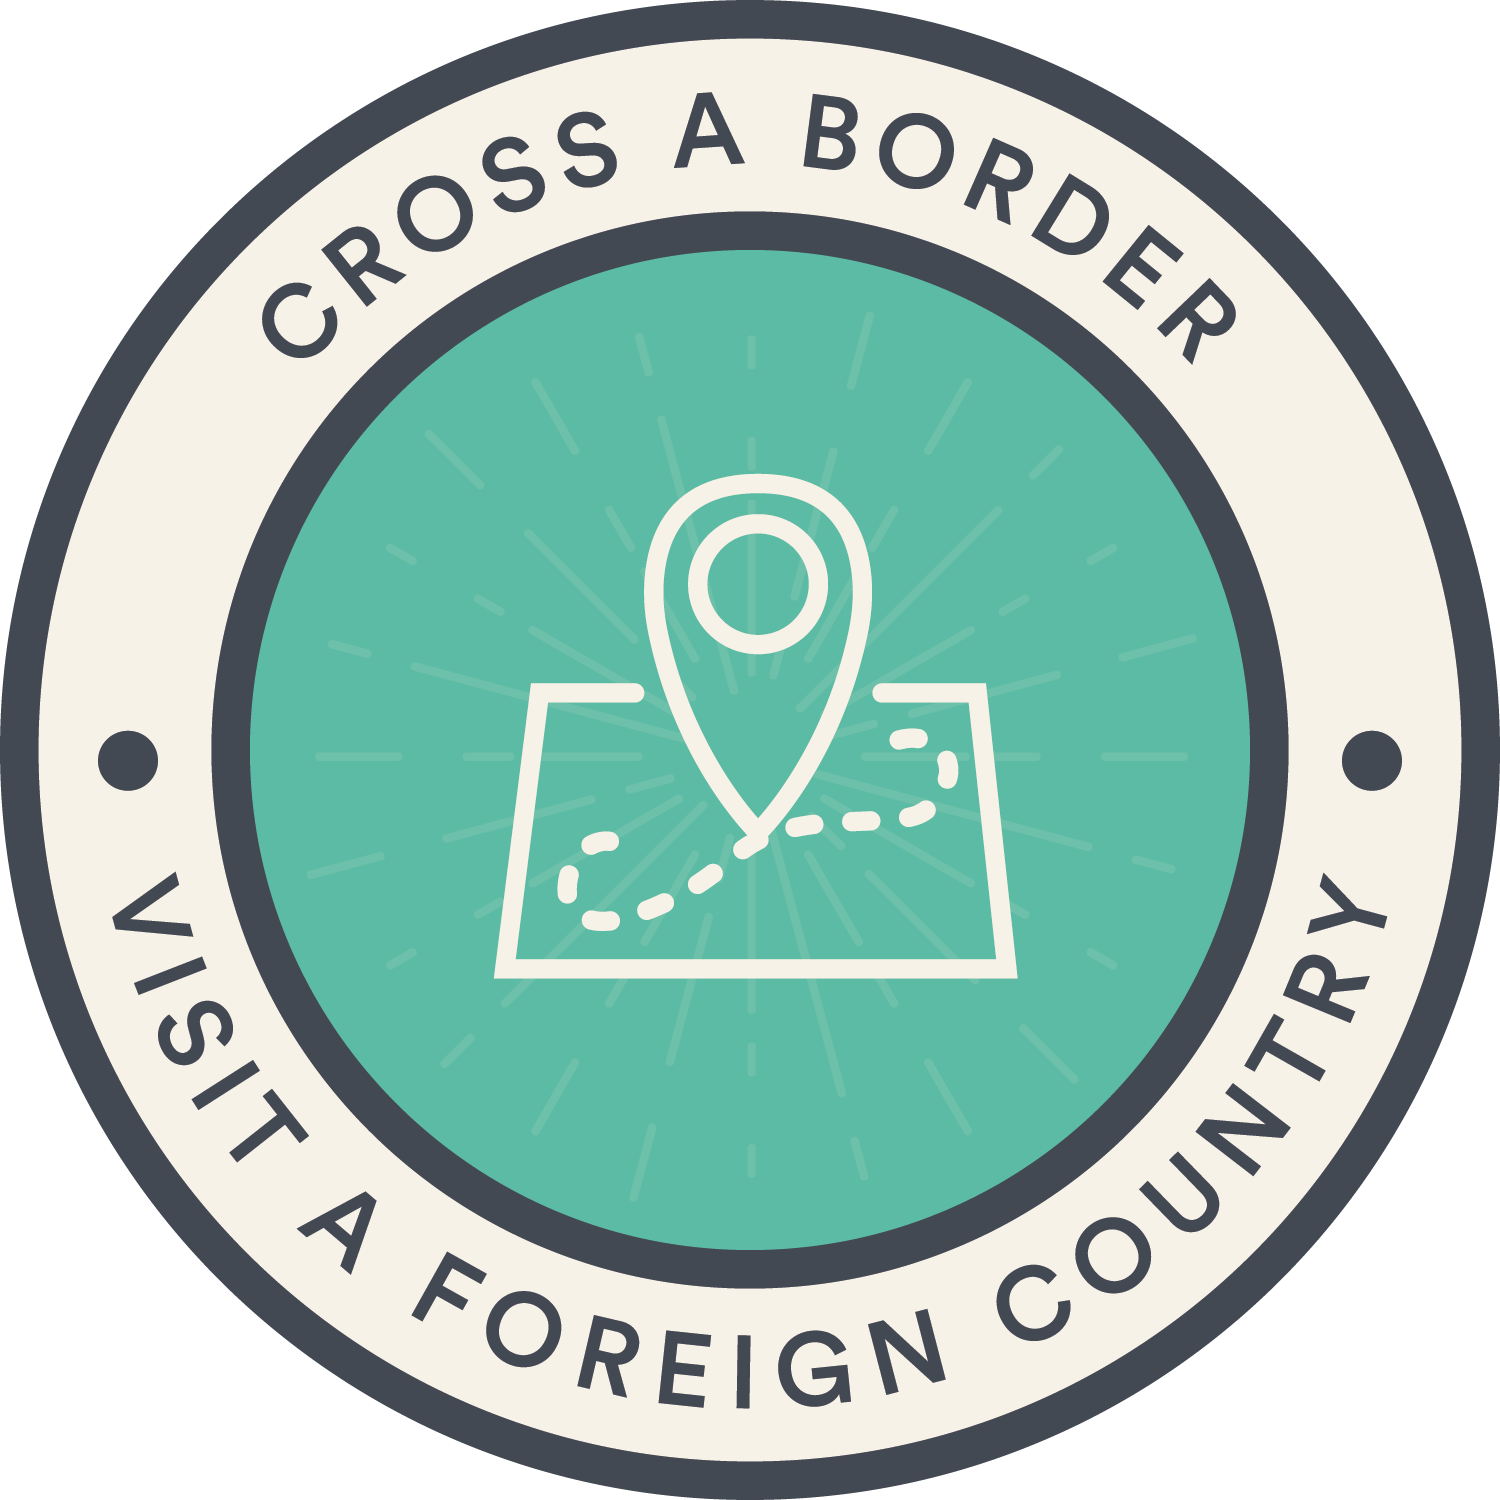 Visit a foreign country